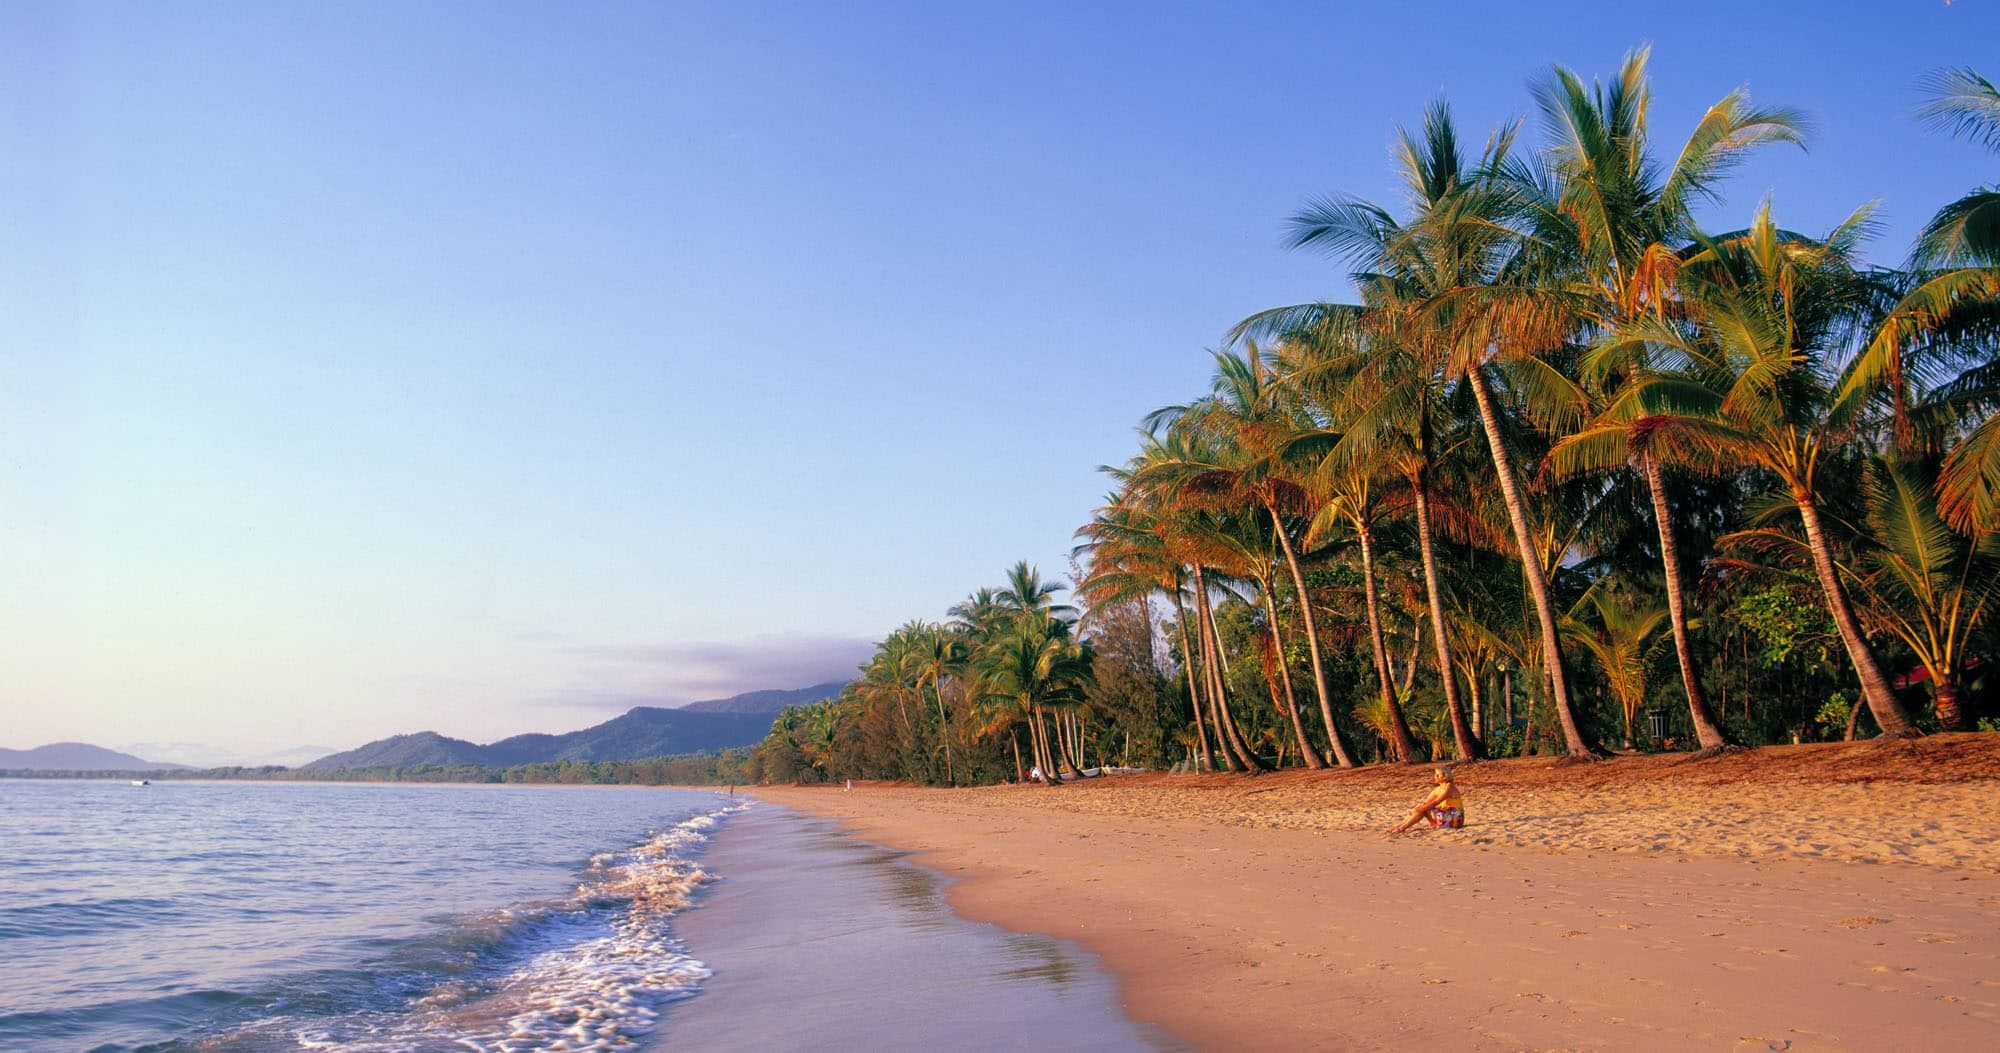 Featured image for “15 Thrilling Things to Do in Cairns, Australia”